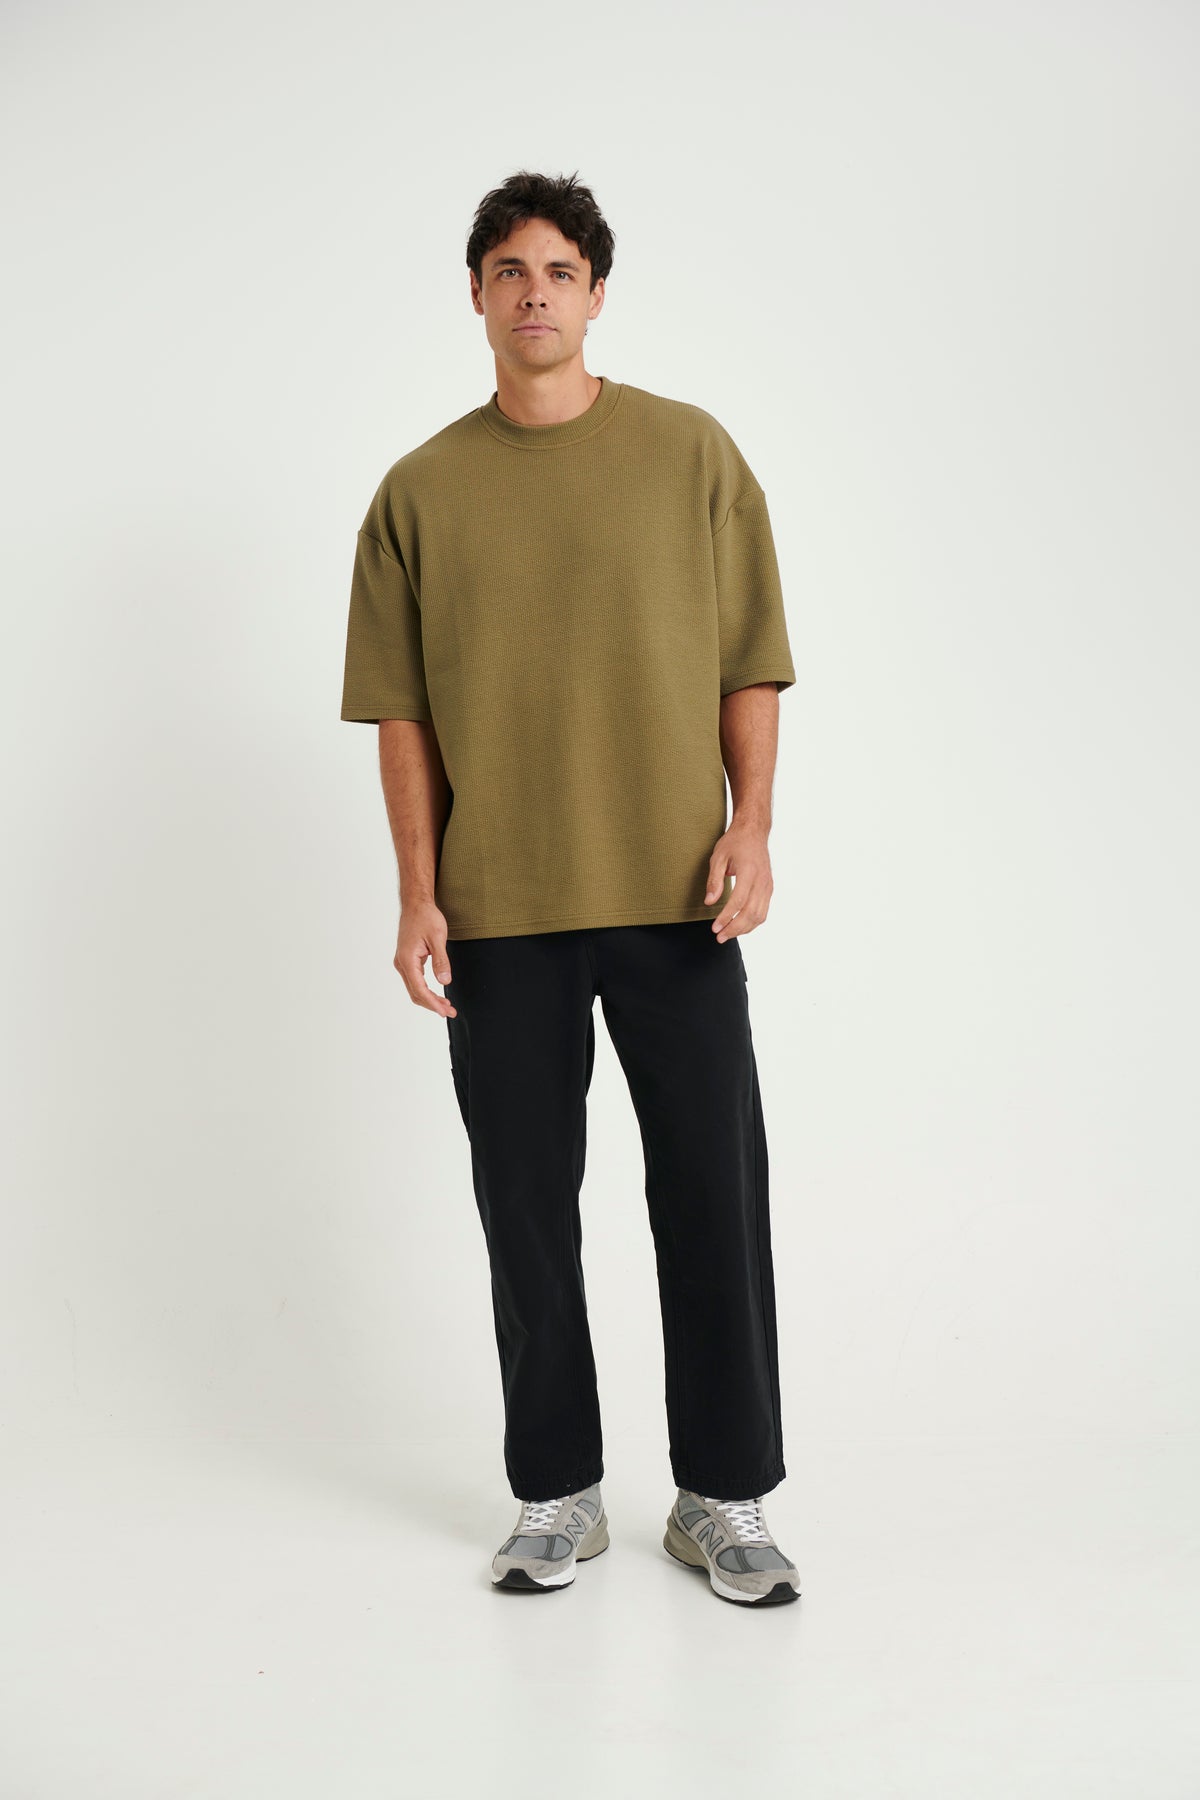 NTH Heavy Ribbed Tee Army - FINAL SALE